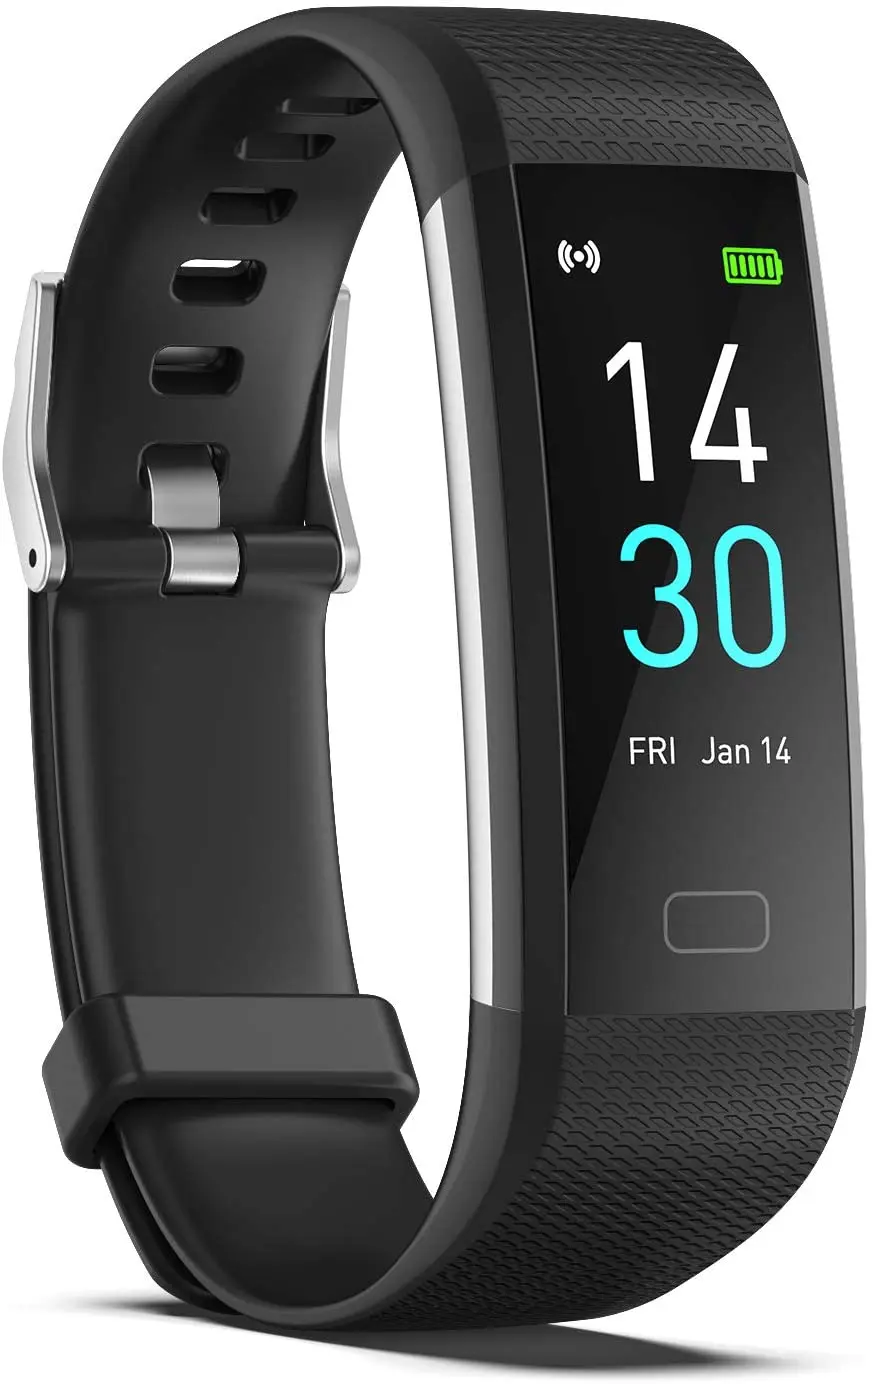 

Waterproof Fitness Tracker Monitor Heart Rate Sleep Blood Pressure Blood Oxygen, Step Count, Calorie 16 Sports Modes Activity